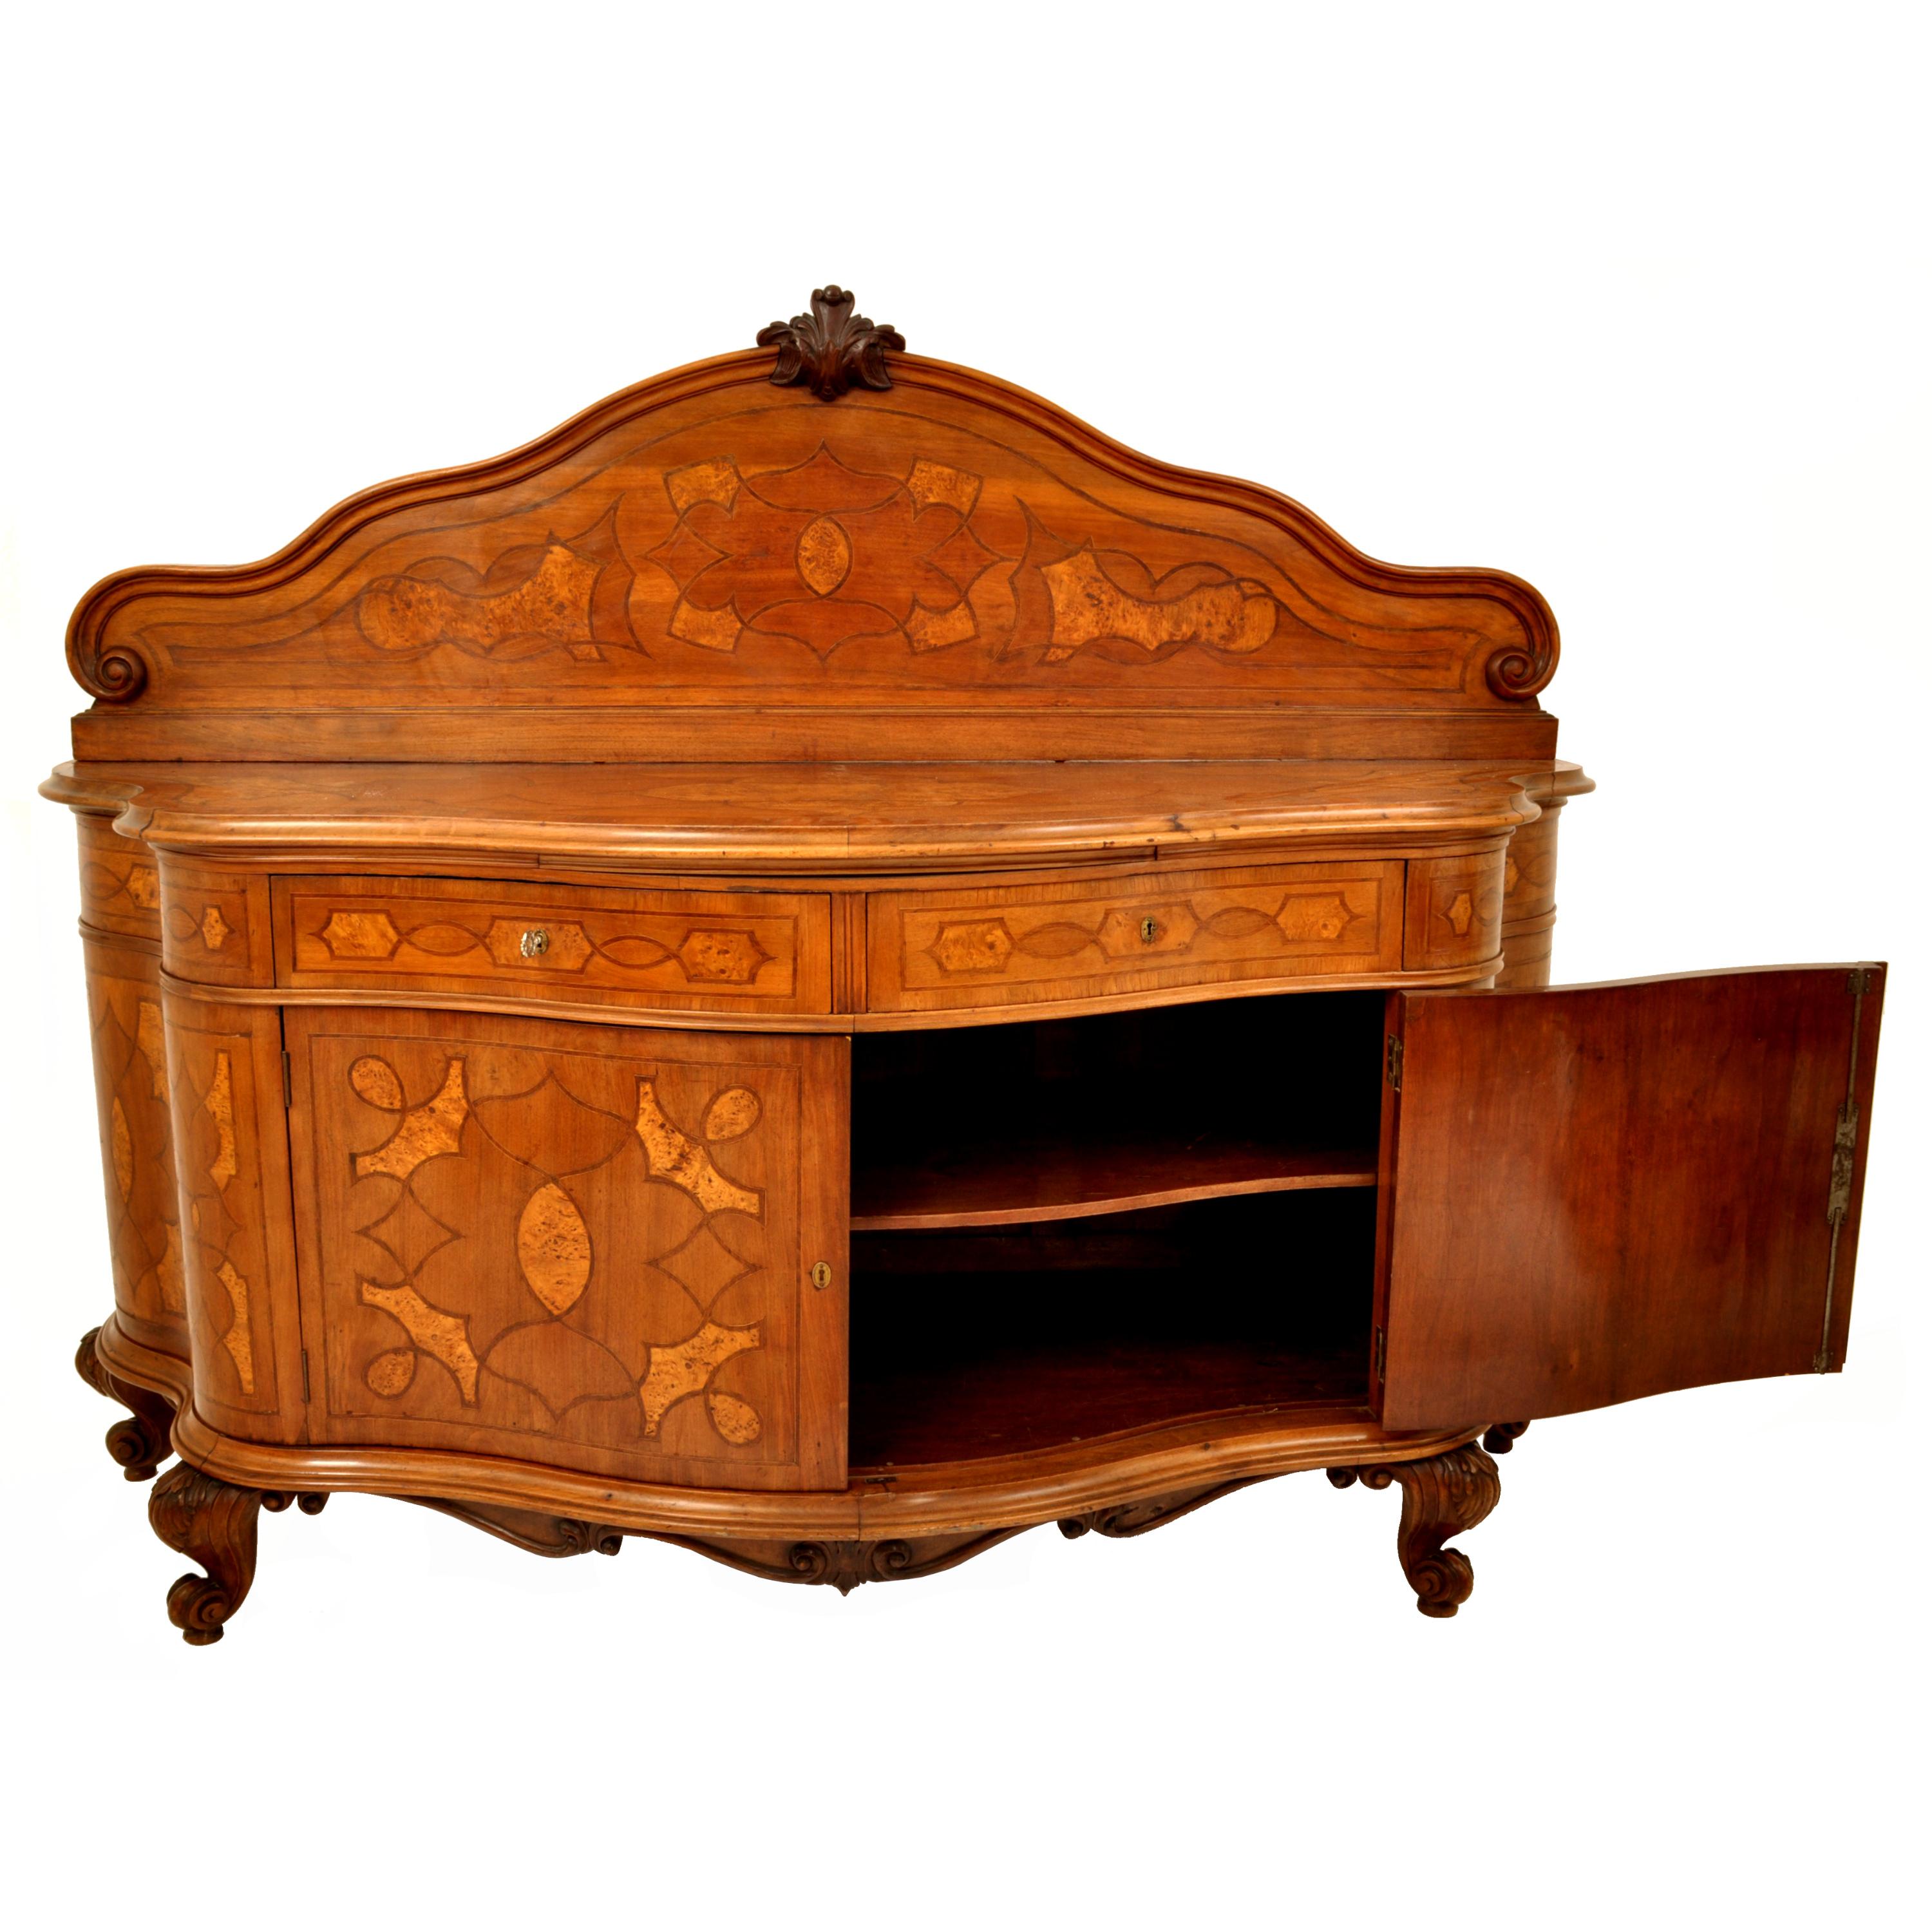 Antique Austrian Baroque Inlaid Marquetry Cabinet Sideboard Buffet Server 1880 In Good Condition For Sale In Portland, OR